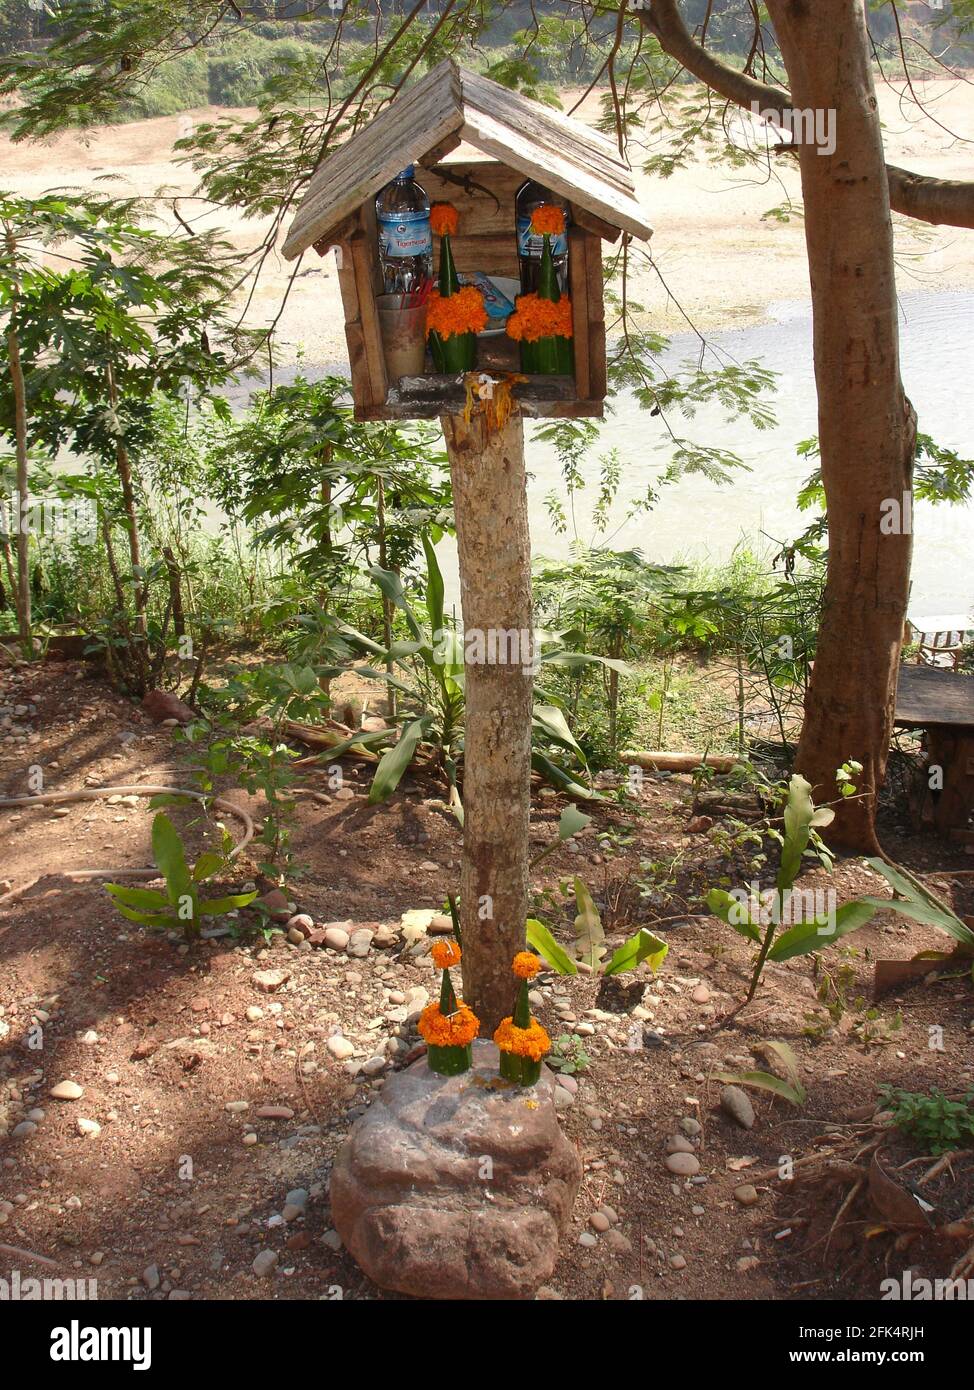 Riverside spirit house with water, food and marigolds for the spirits to ensure protection against malevolent forces.. Stock Photo